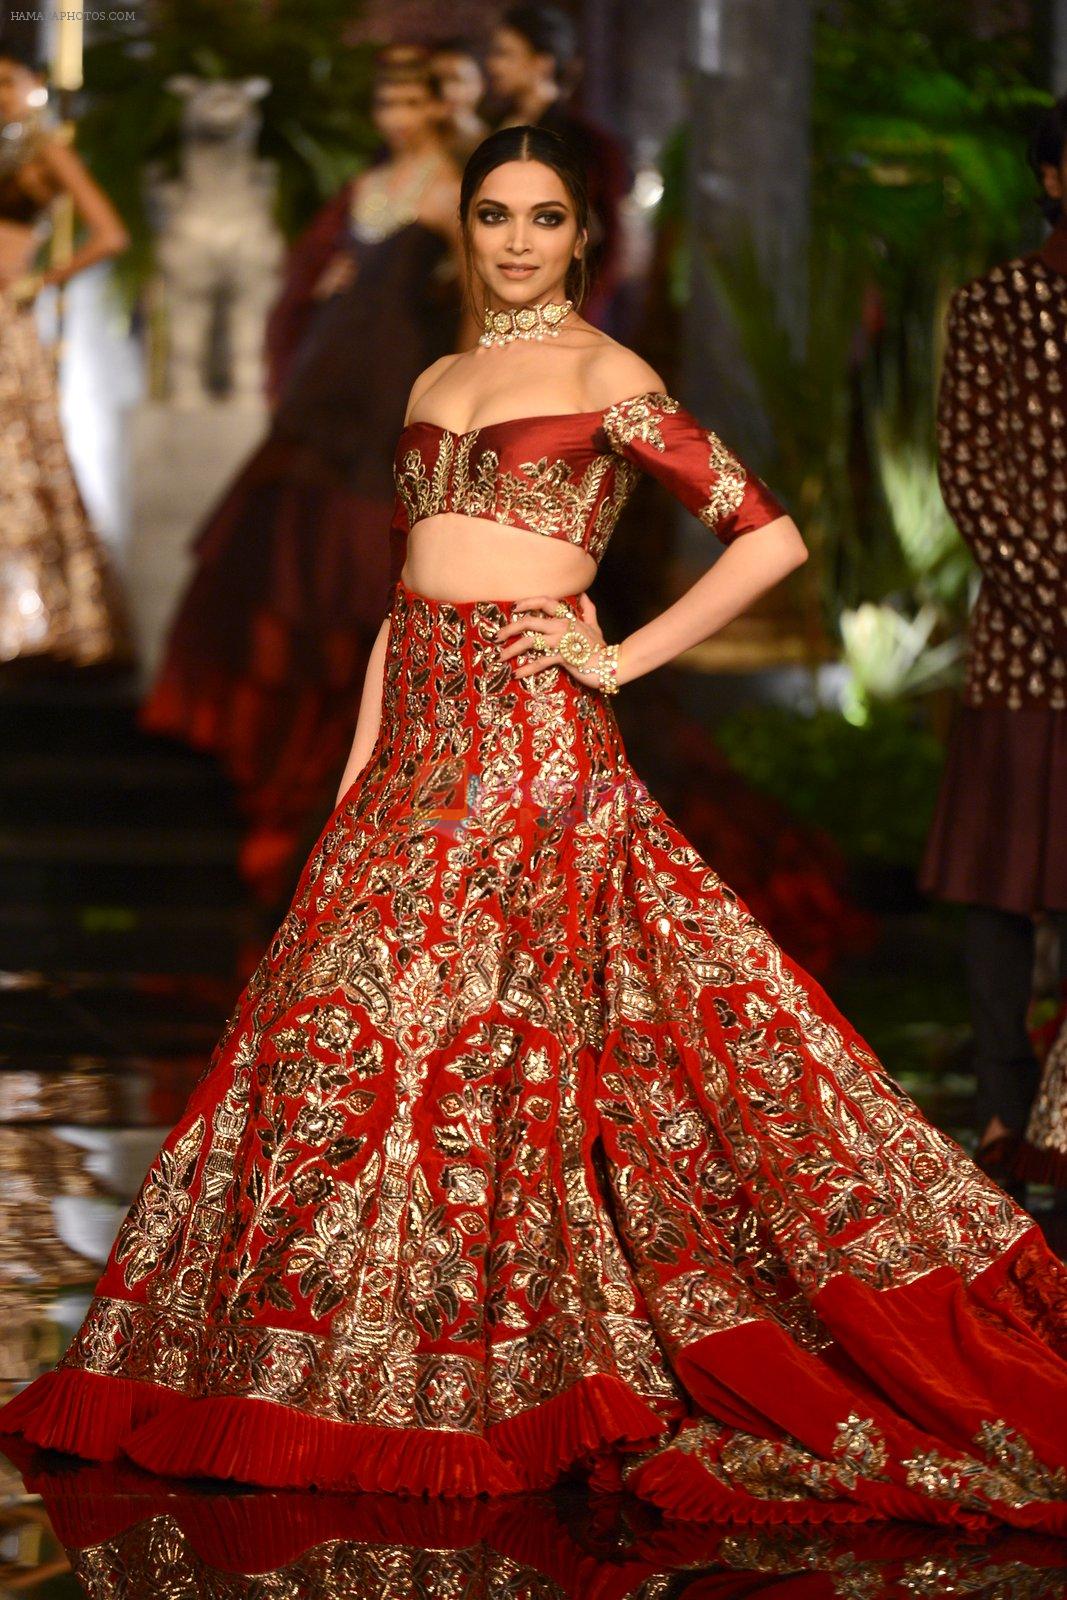 Deepika Padukone during the FDCI India Couture Week 2016 at the Taj Palace on July 21, 2016